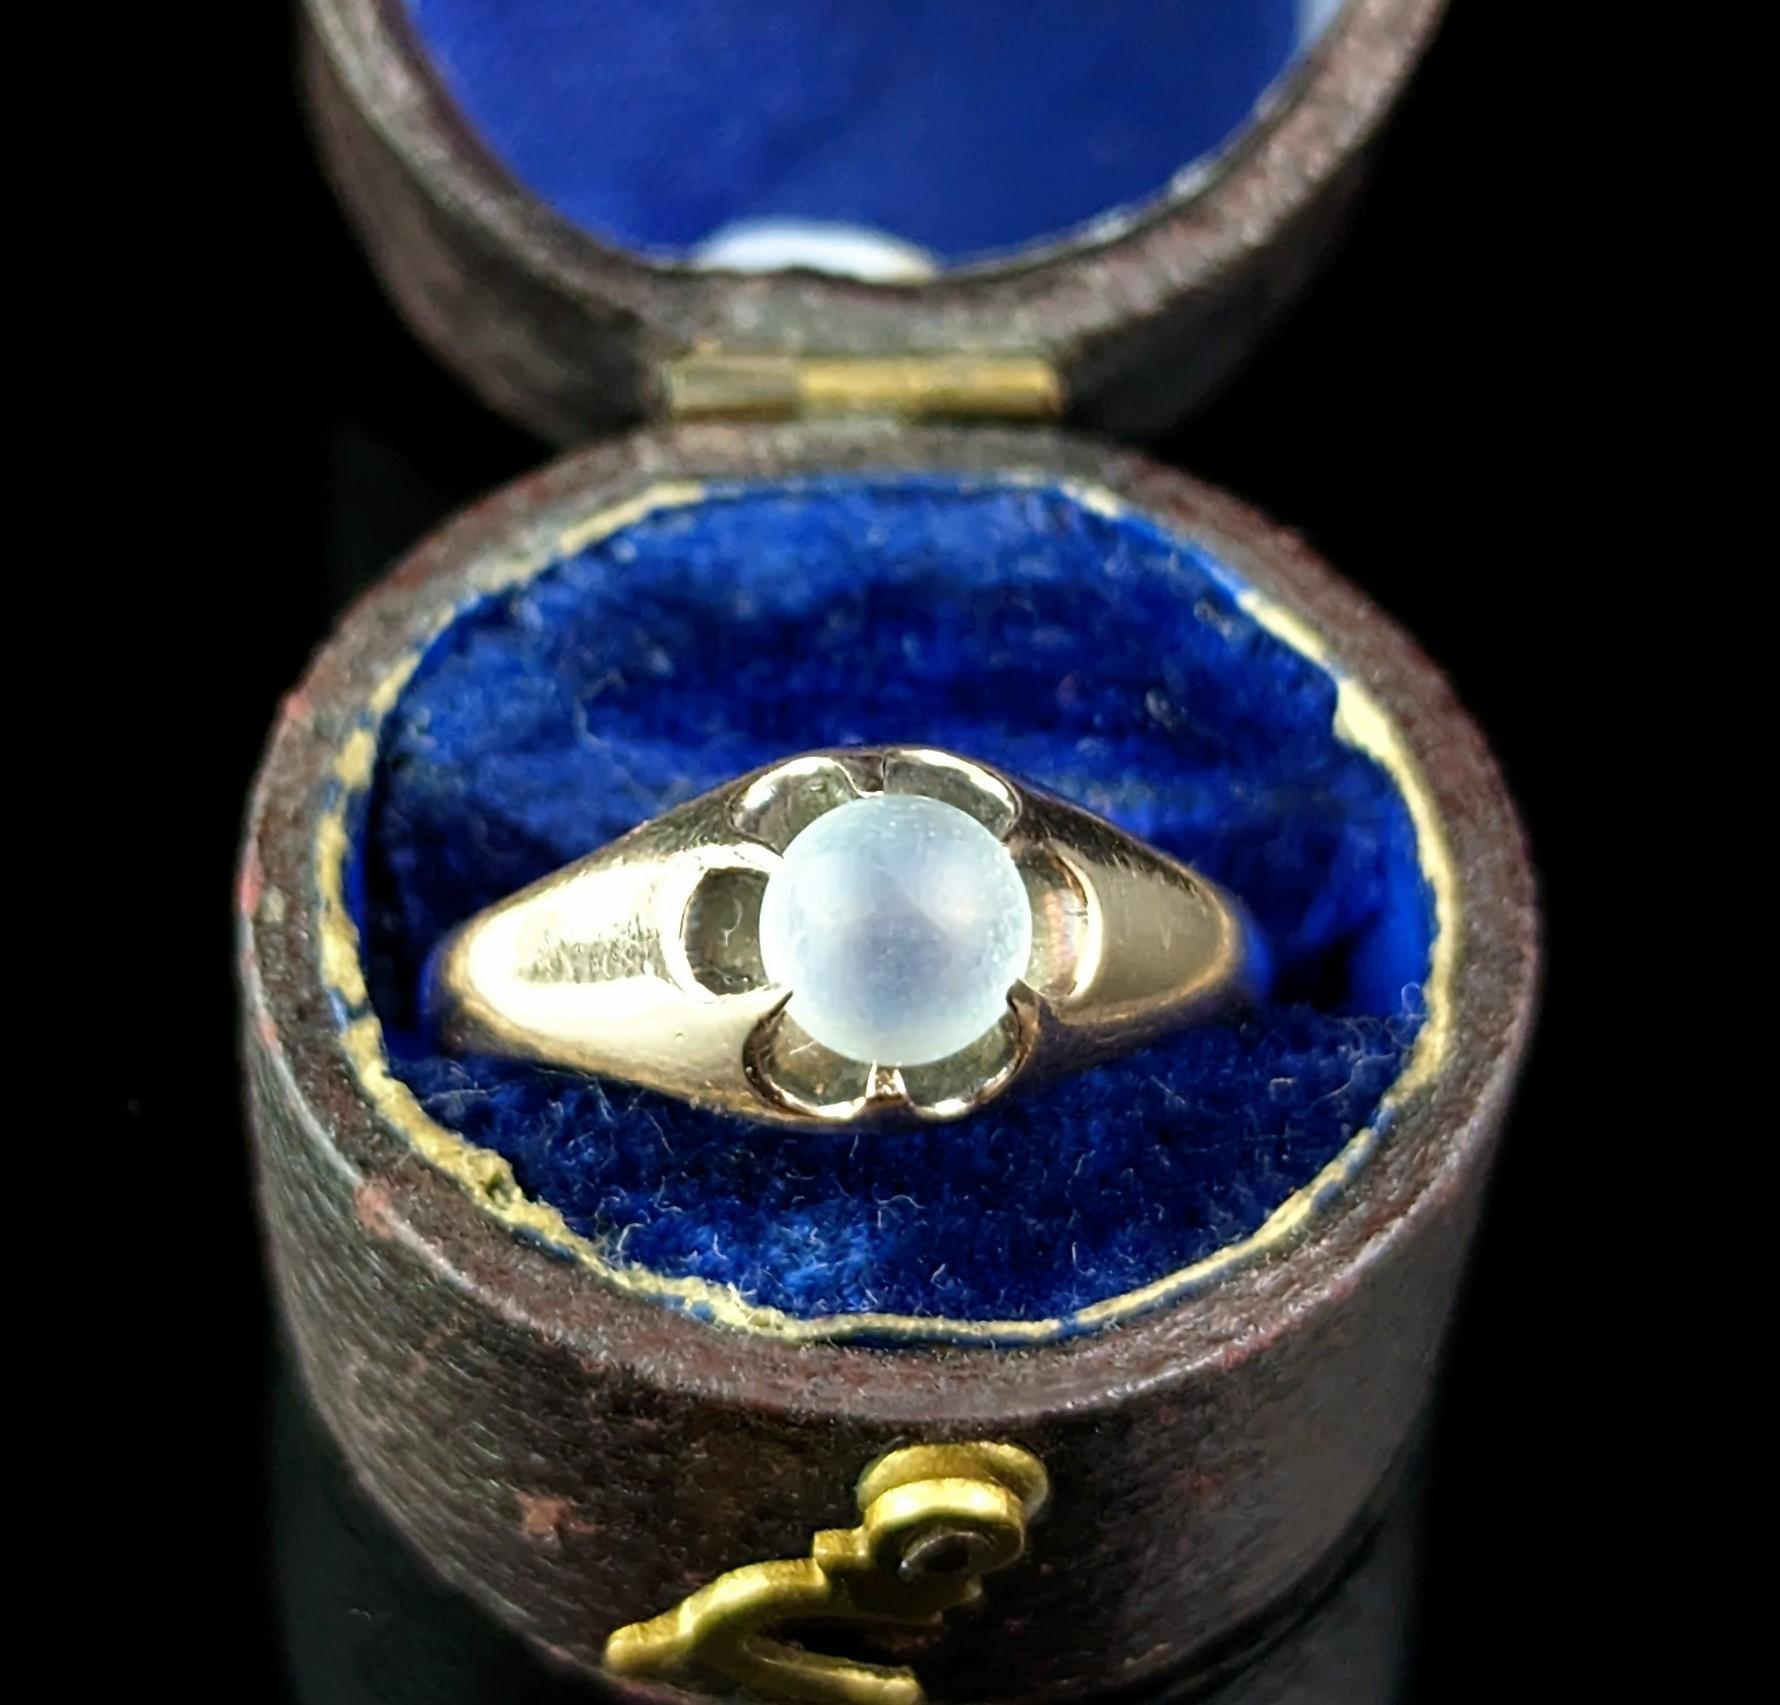 Such a magic and mystical antique moonstone ring!

This ring is like wearing a little crystal ball on your hand, the moonstone is a complete sphere and it rolls smoothly within the setting which gives it a very interesting angle.

The moonstone